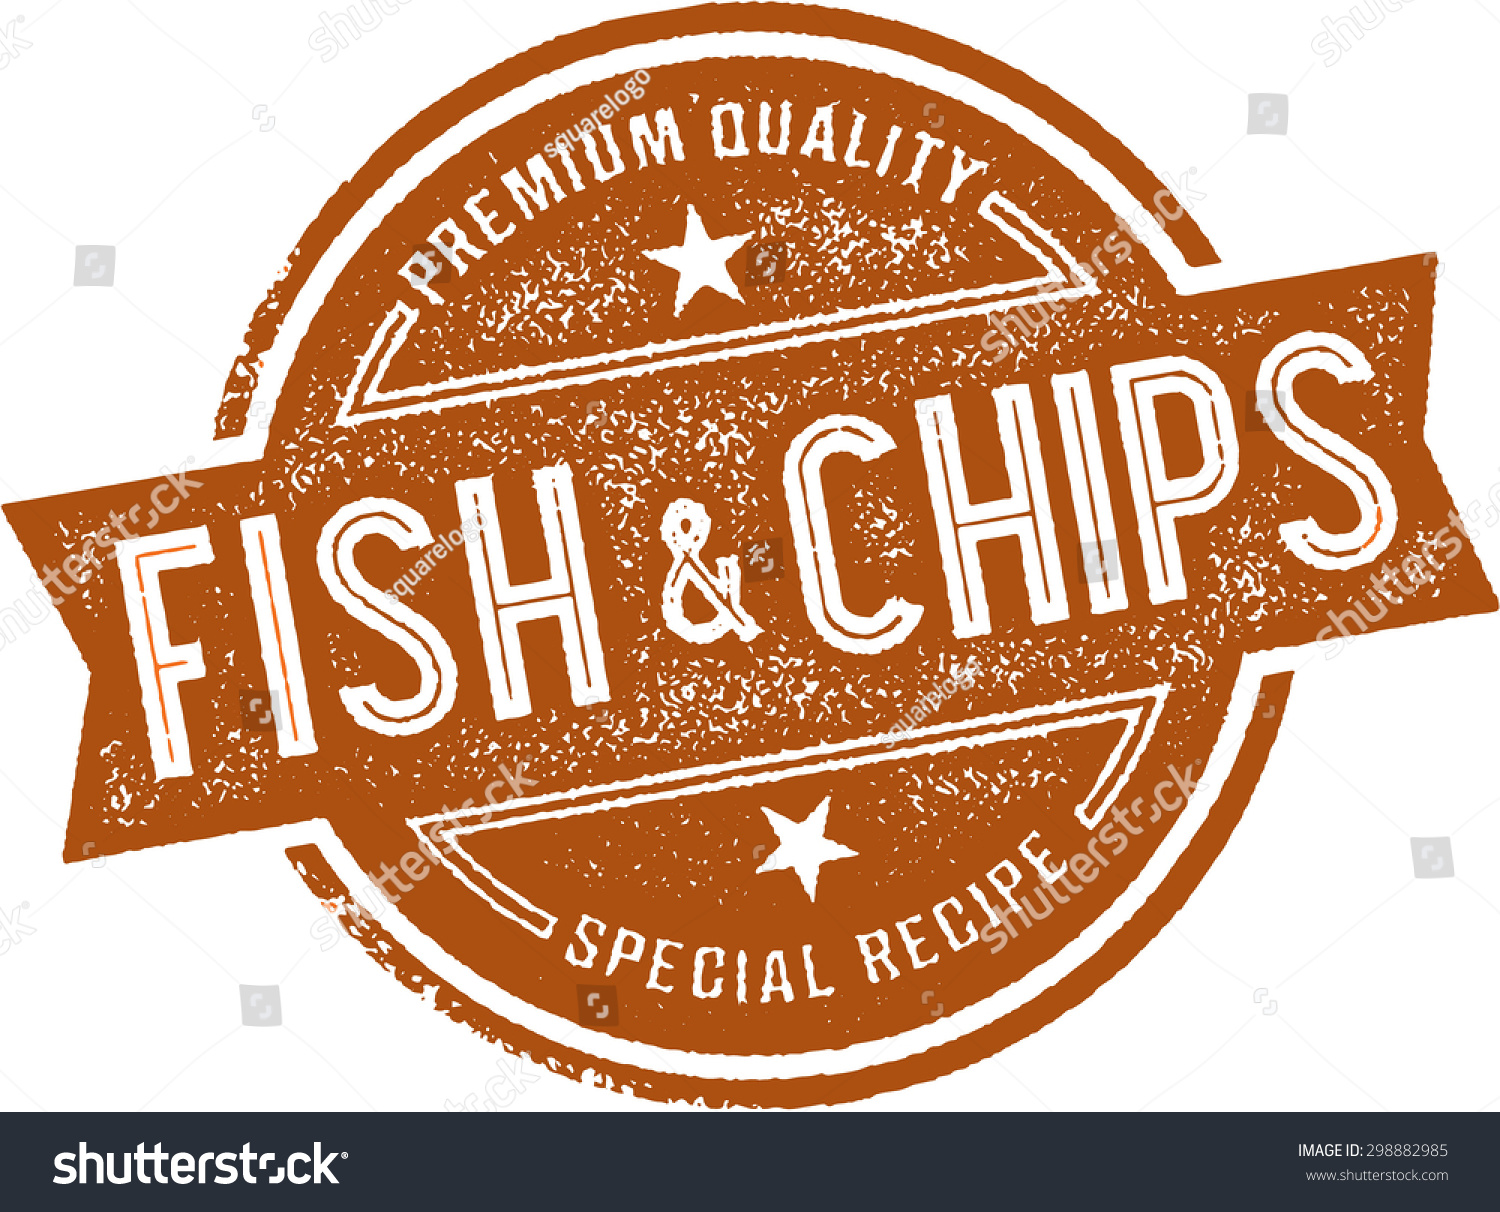 clipart of fish and chips - photo #34